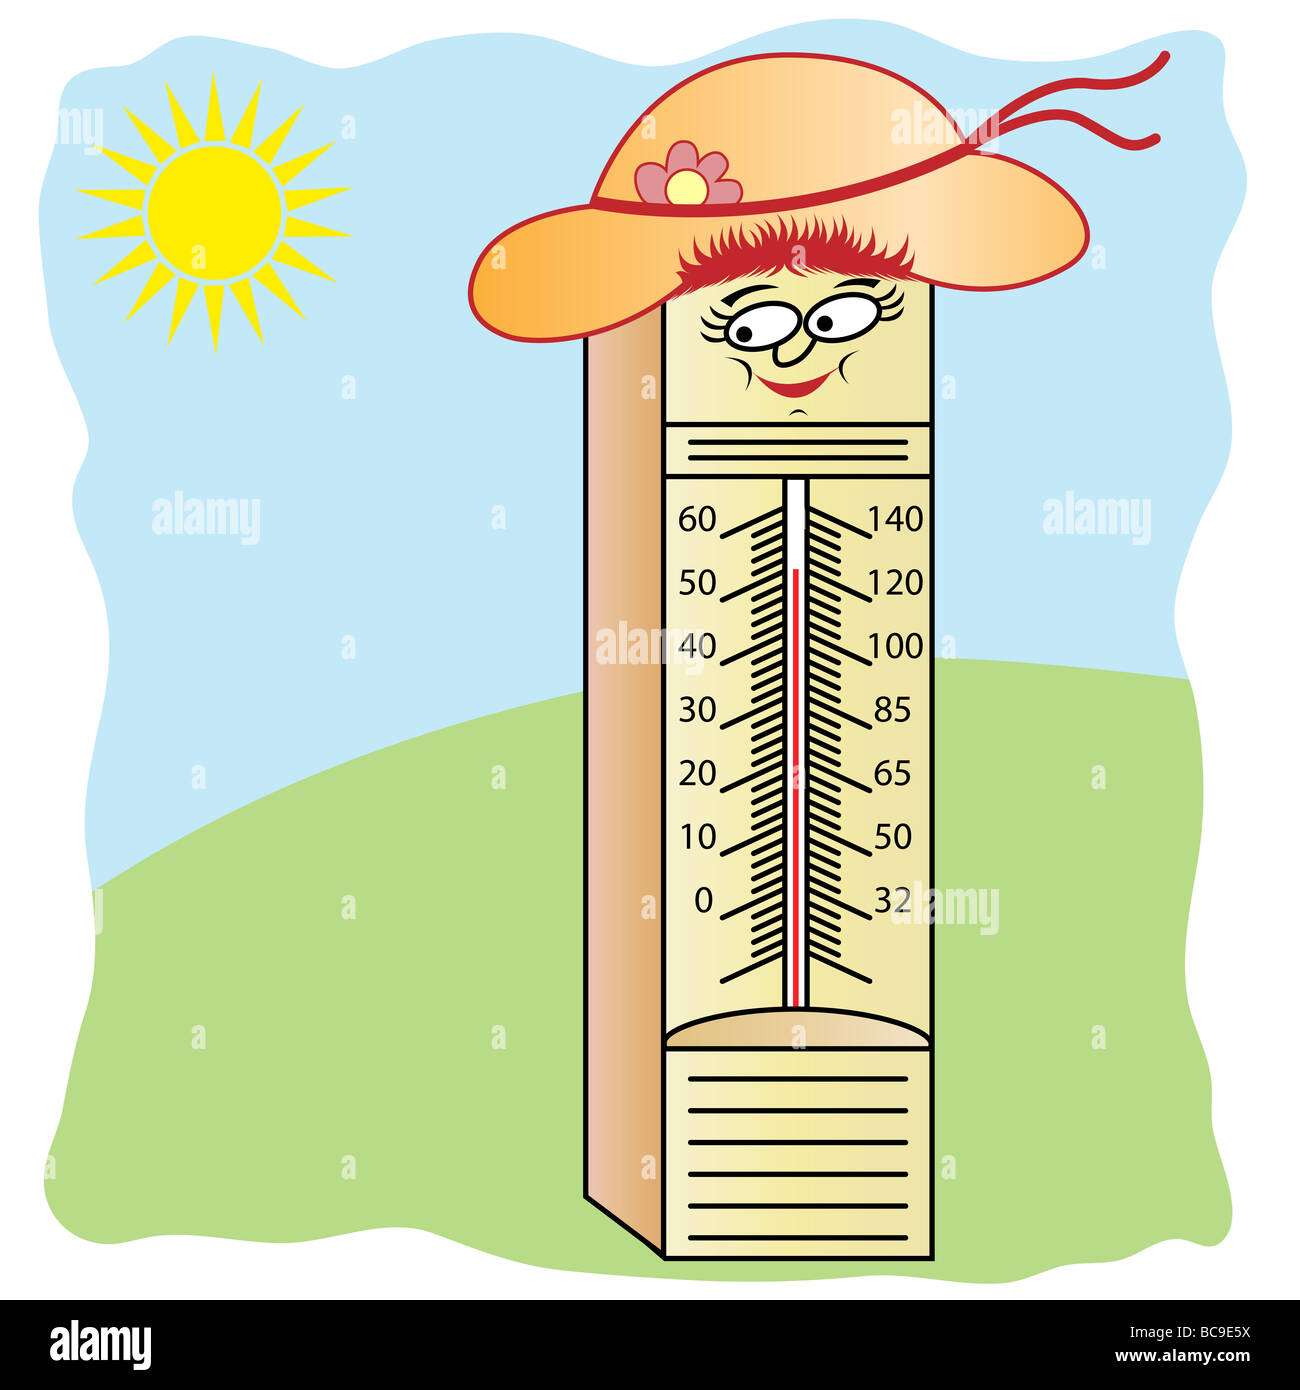 Thermometer cartoon character wearing a summer hat Stock Photo